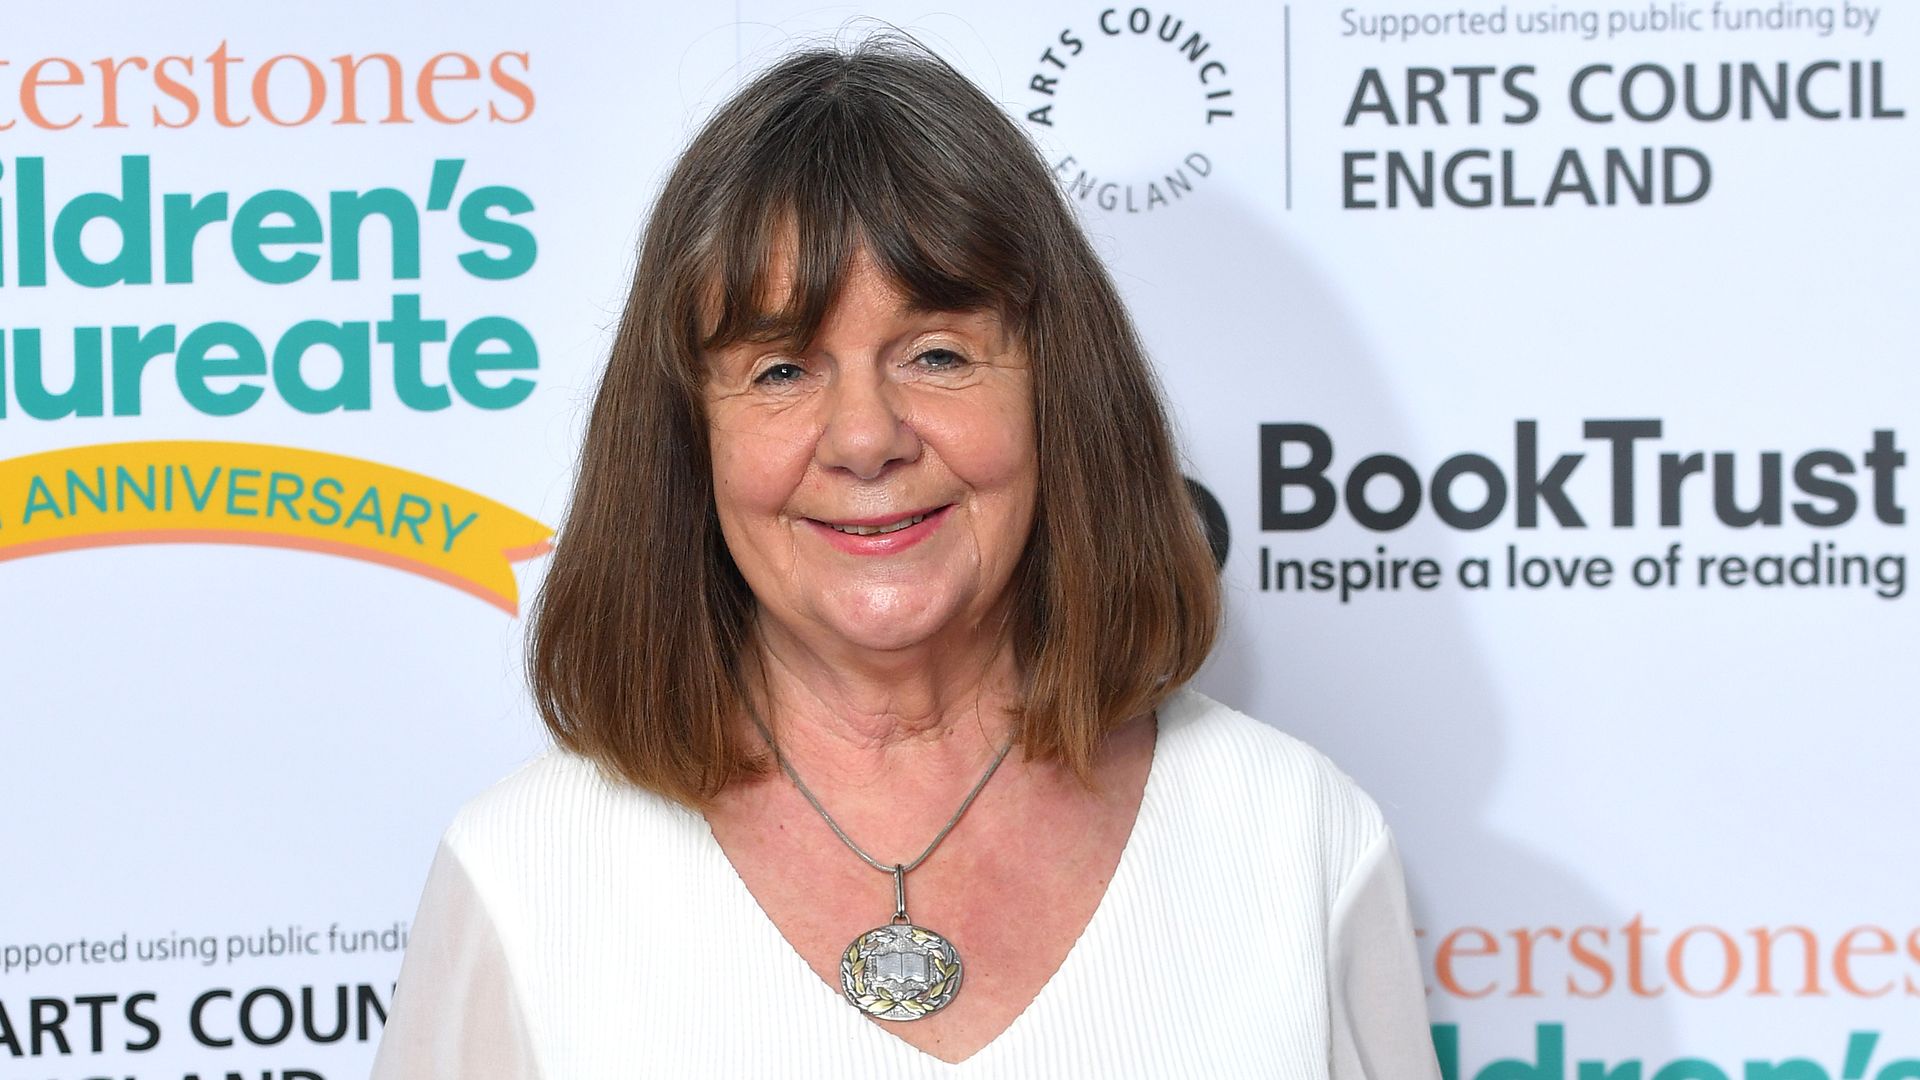 Children's author Julia Donaldson CBE attends an event to celebrate 20 years of the Waterstones Children's Laureate 